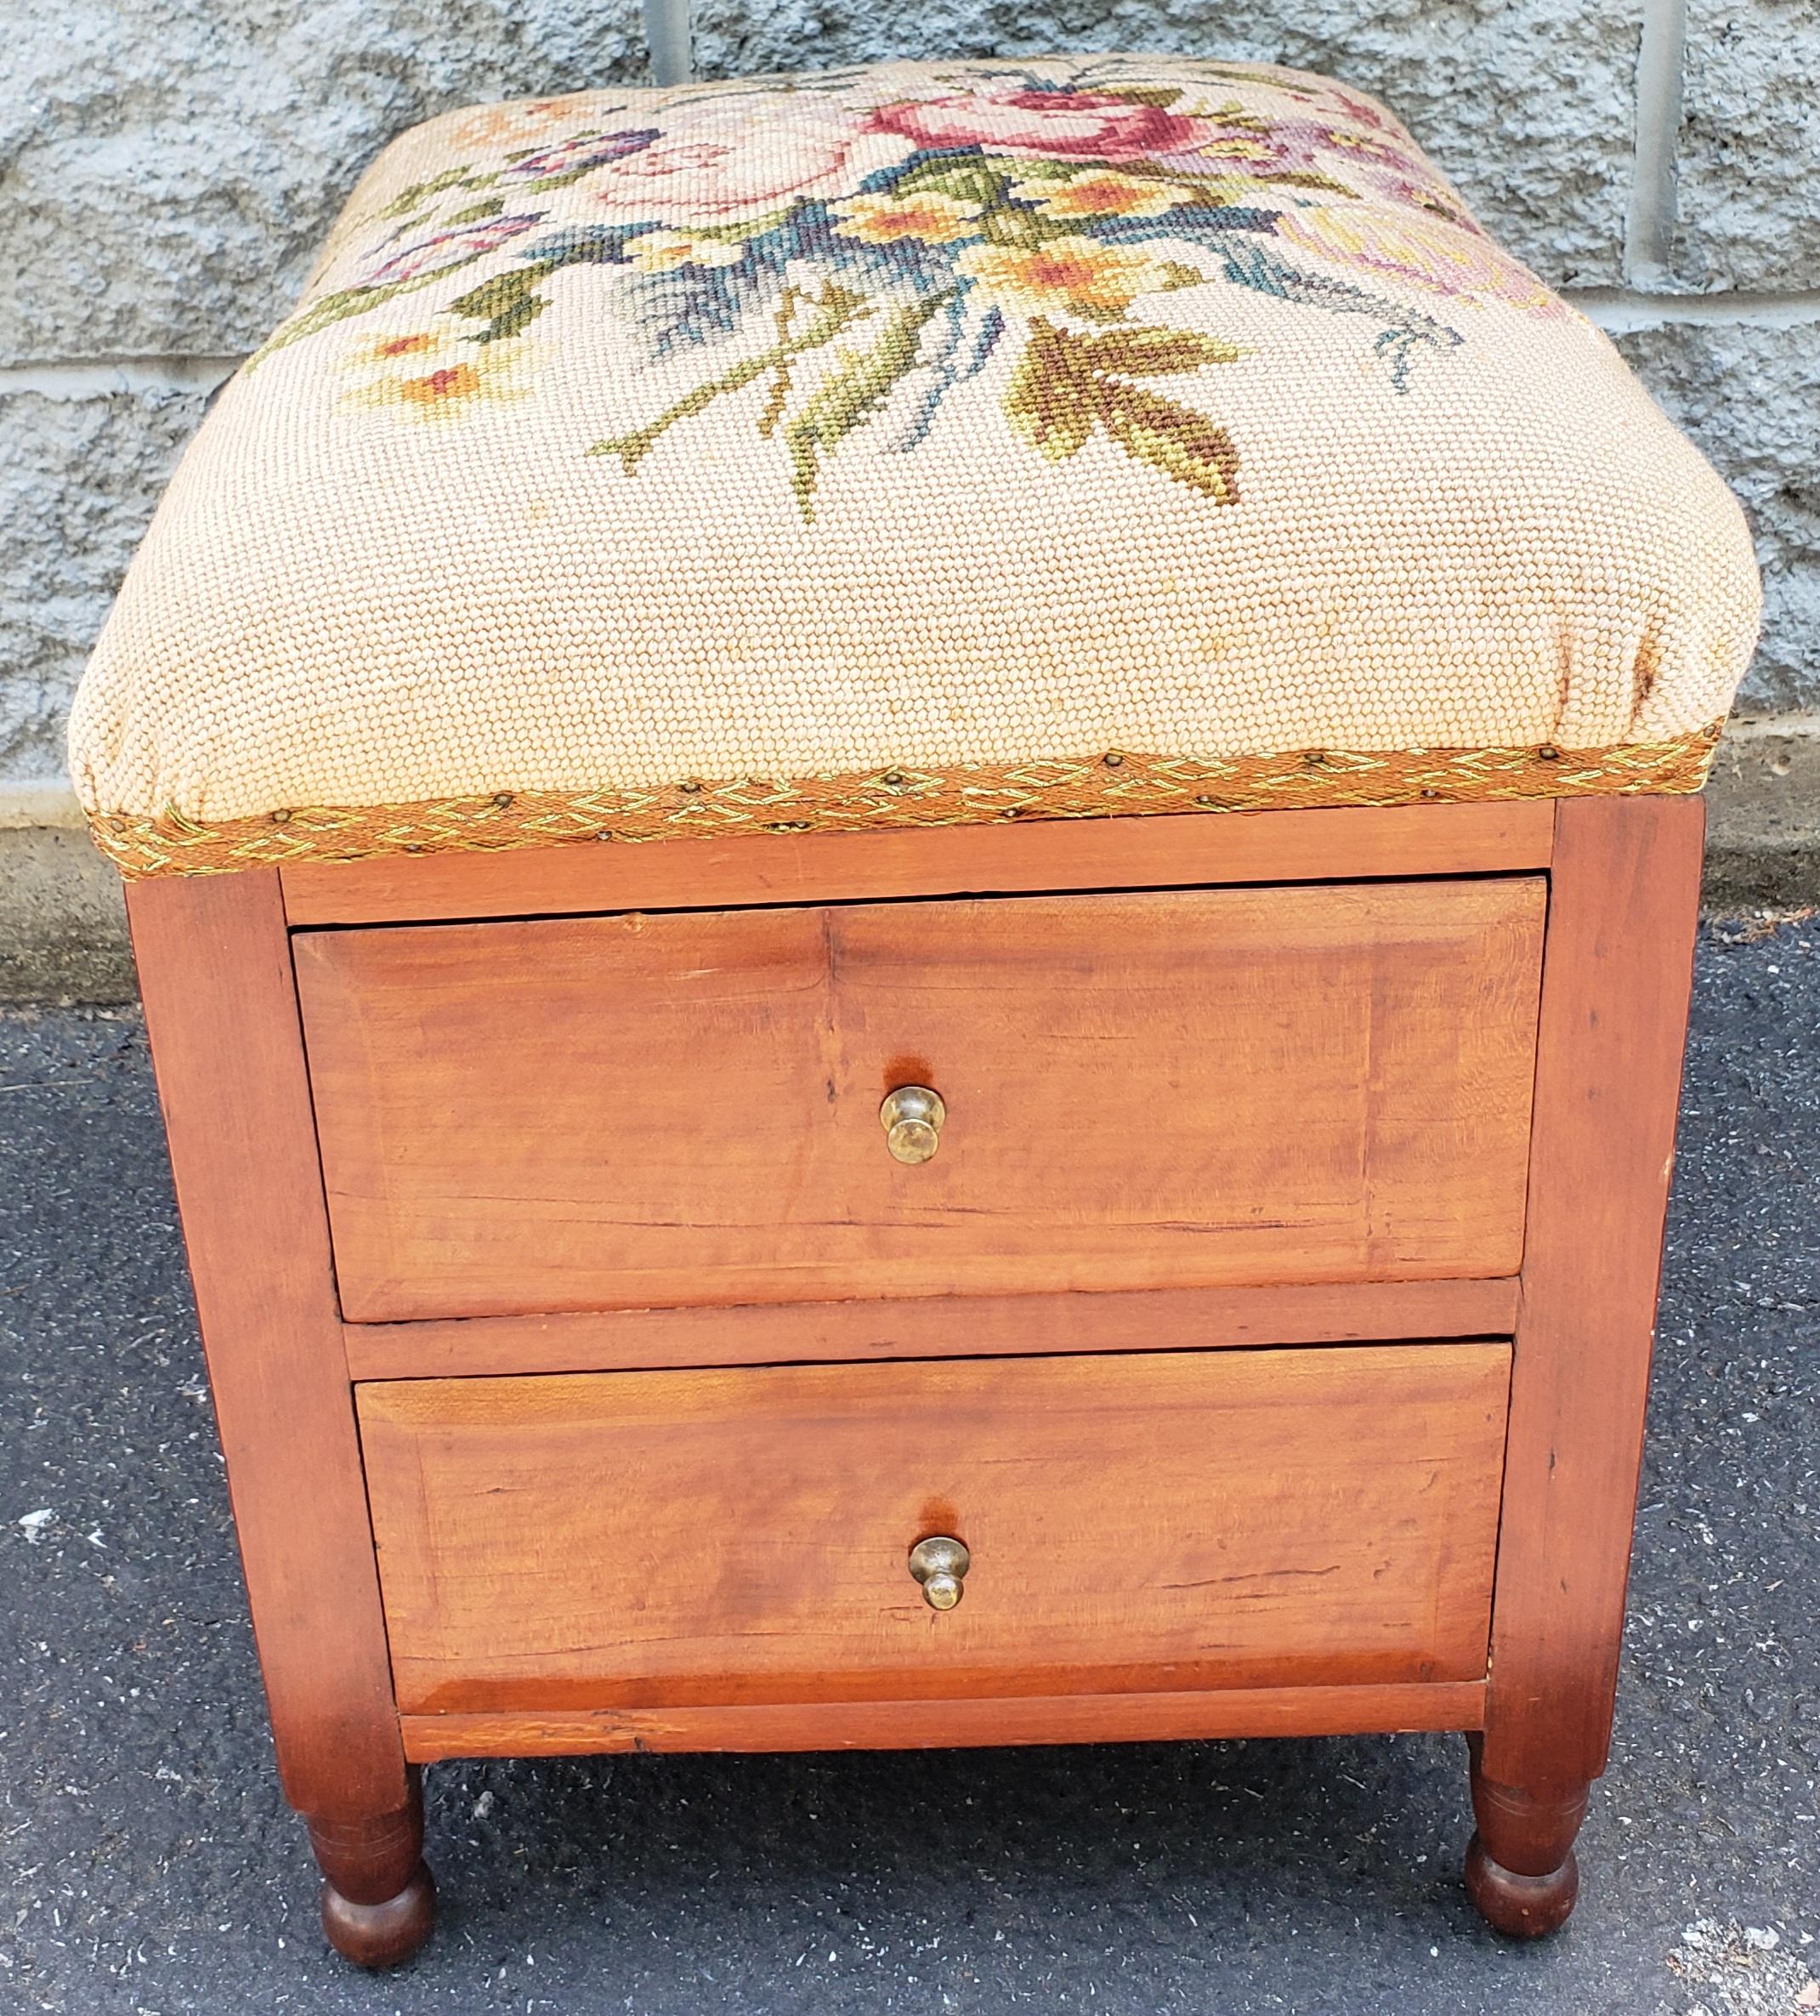 A rare Victorian Two-Drawer Mahogany Needlework Upholstered Stool on wheels. 
Recently refinished. Both drawers working well. On original wheels.
Measures 15